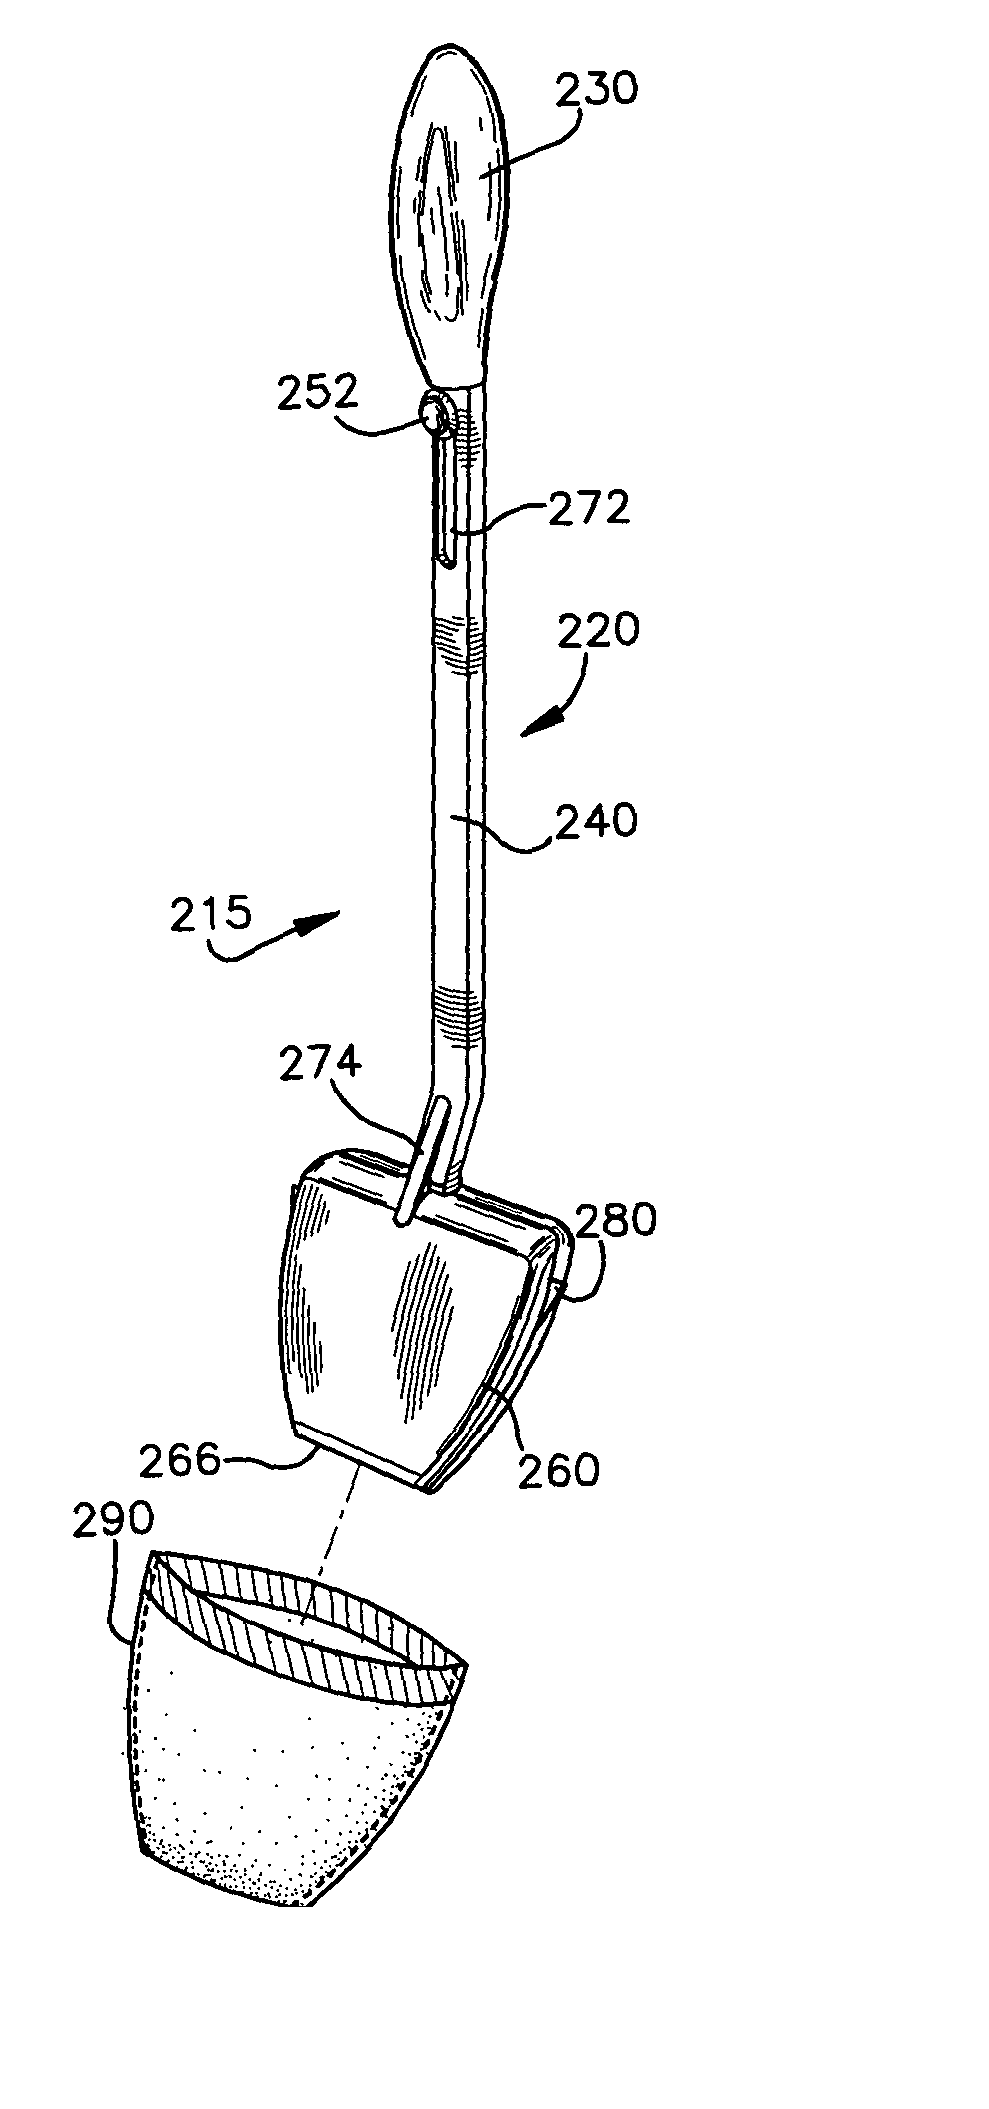 Toilet cleaning apparatus and caddy